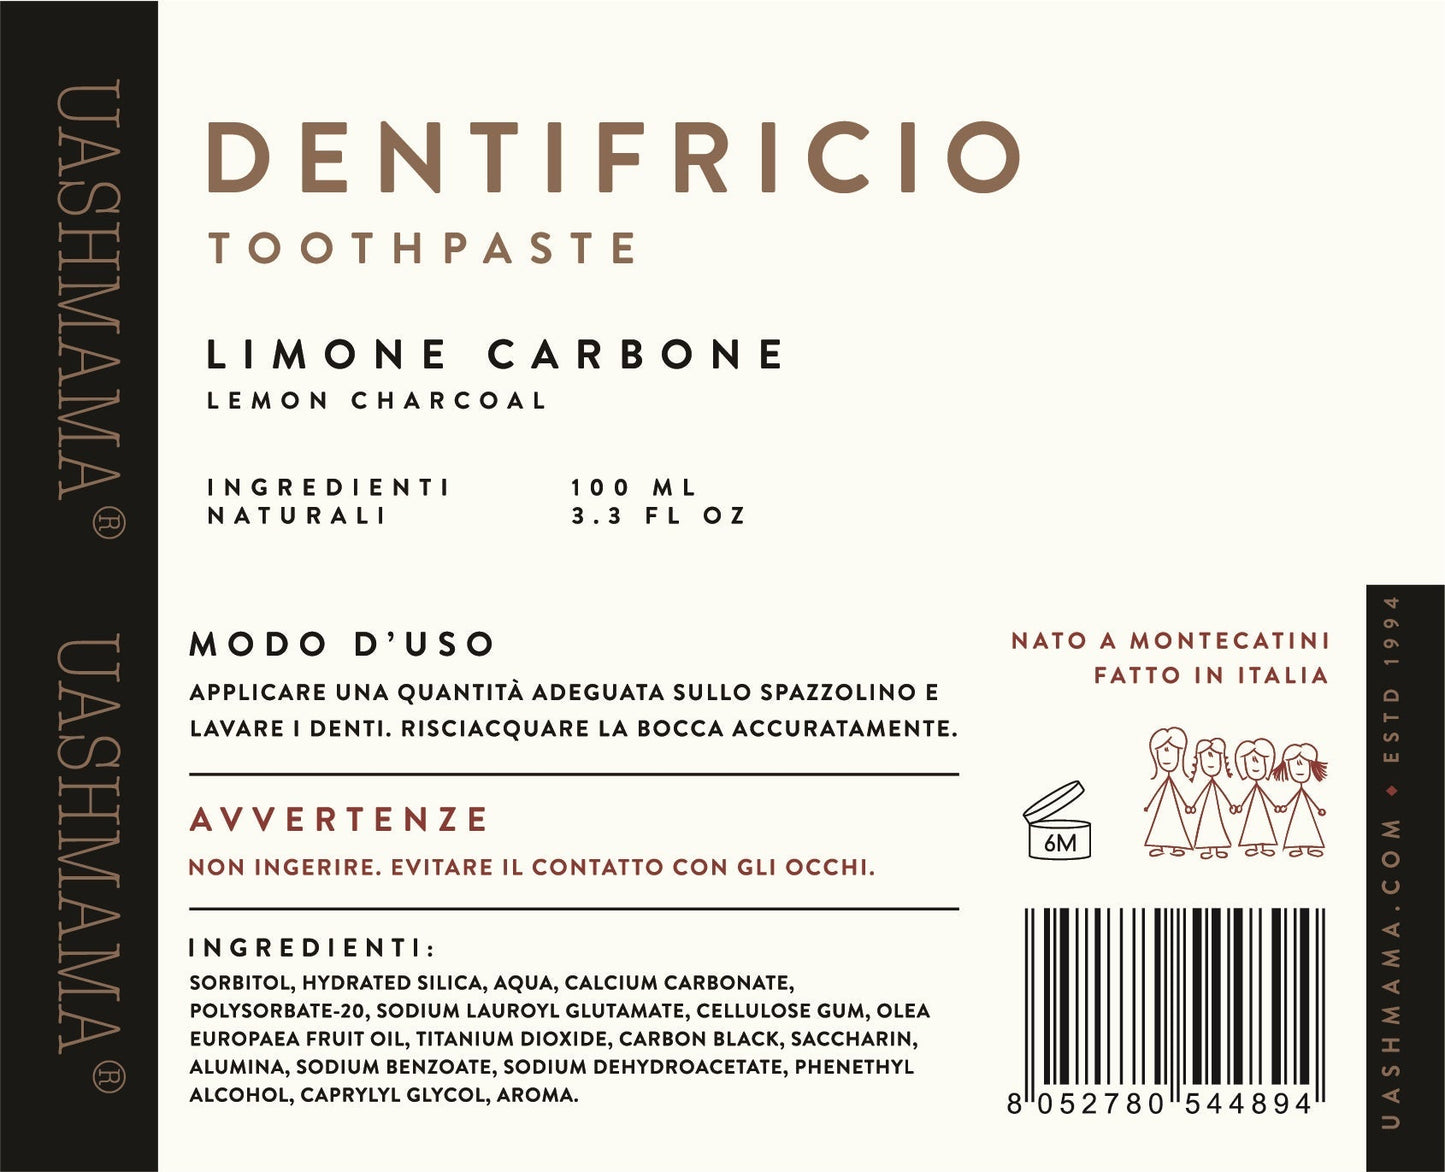 The ingredients are shown in Italian for the charcoal and lemon toothpaste.